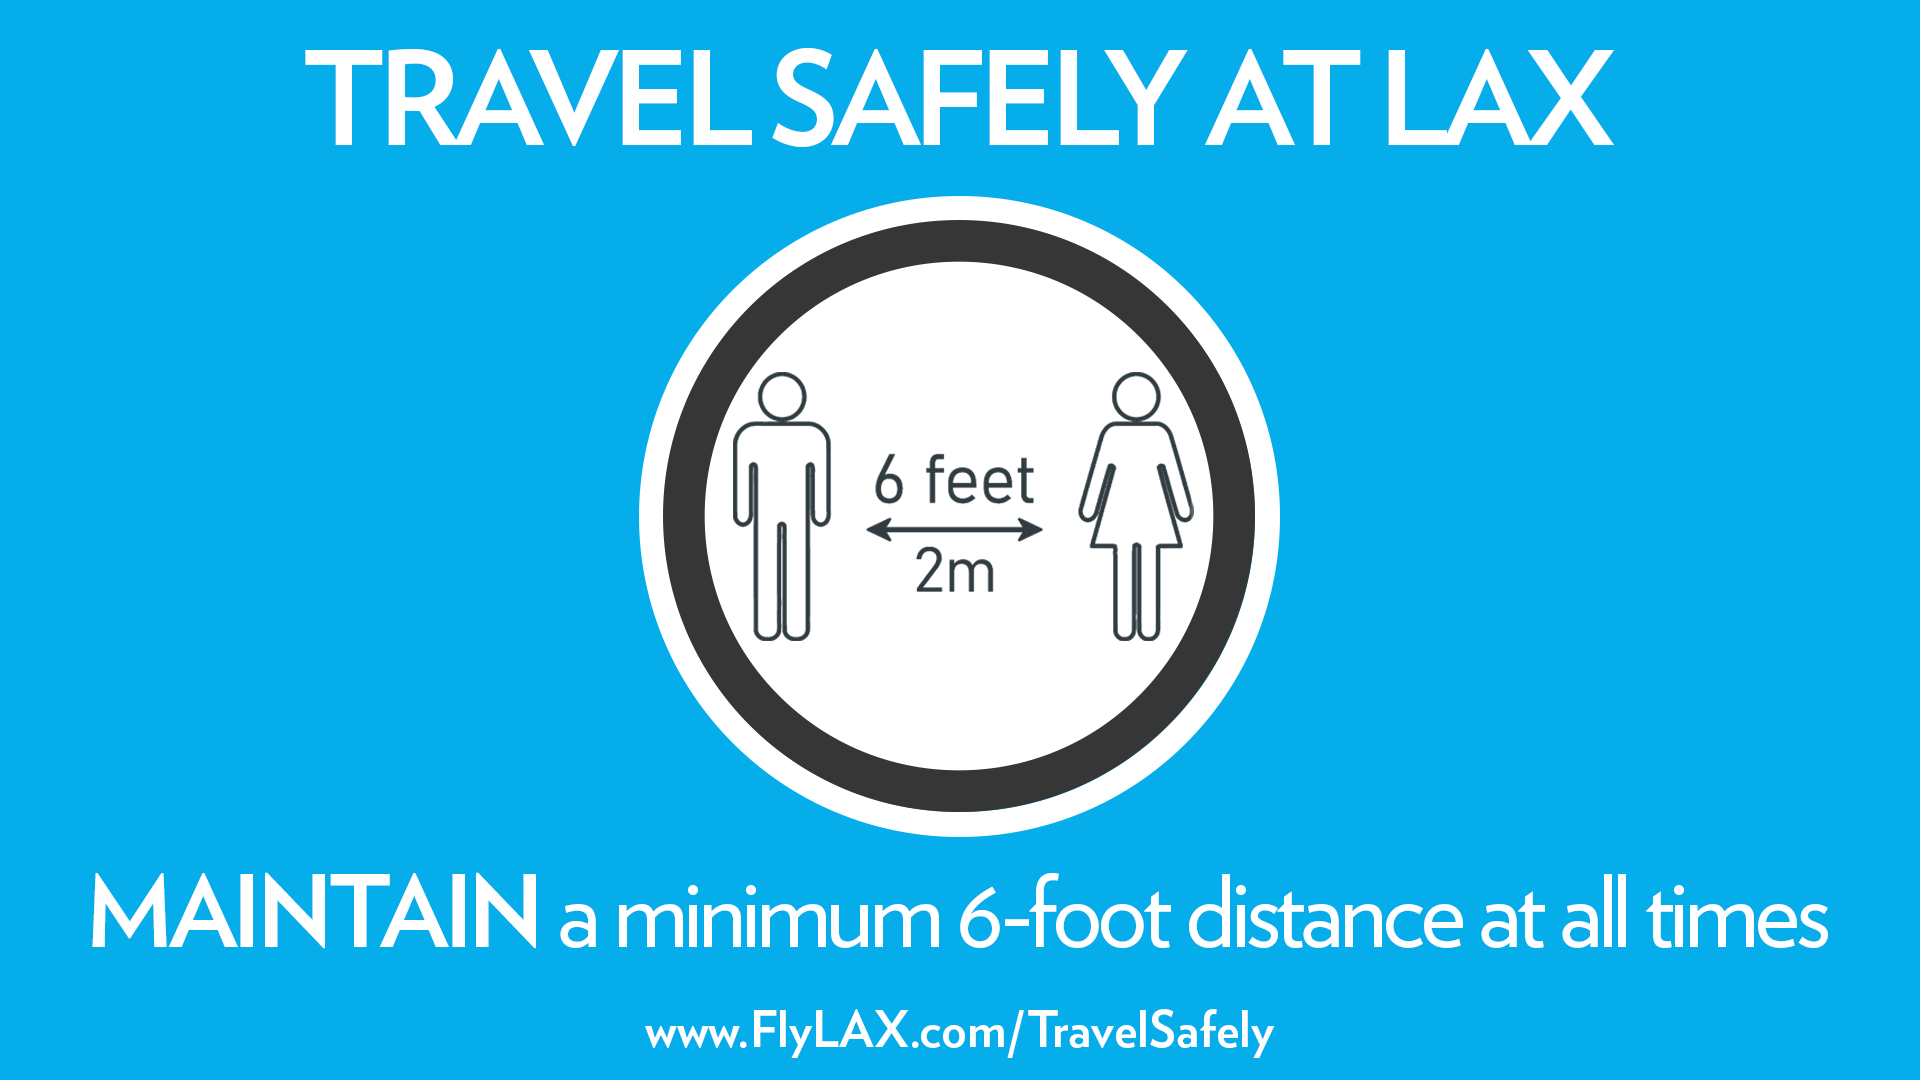 Travel Safely at LAX